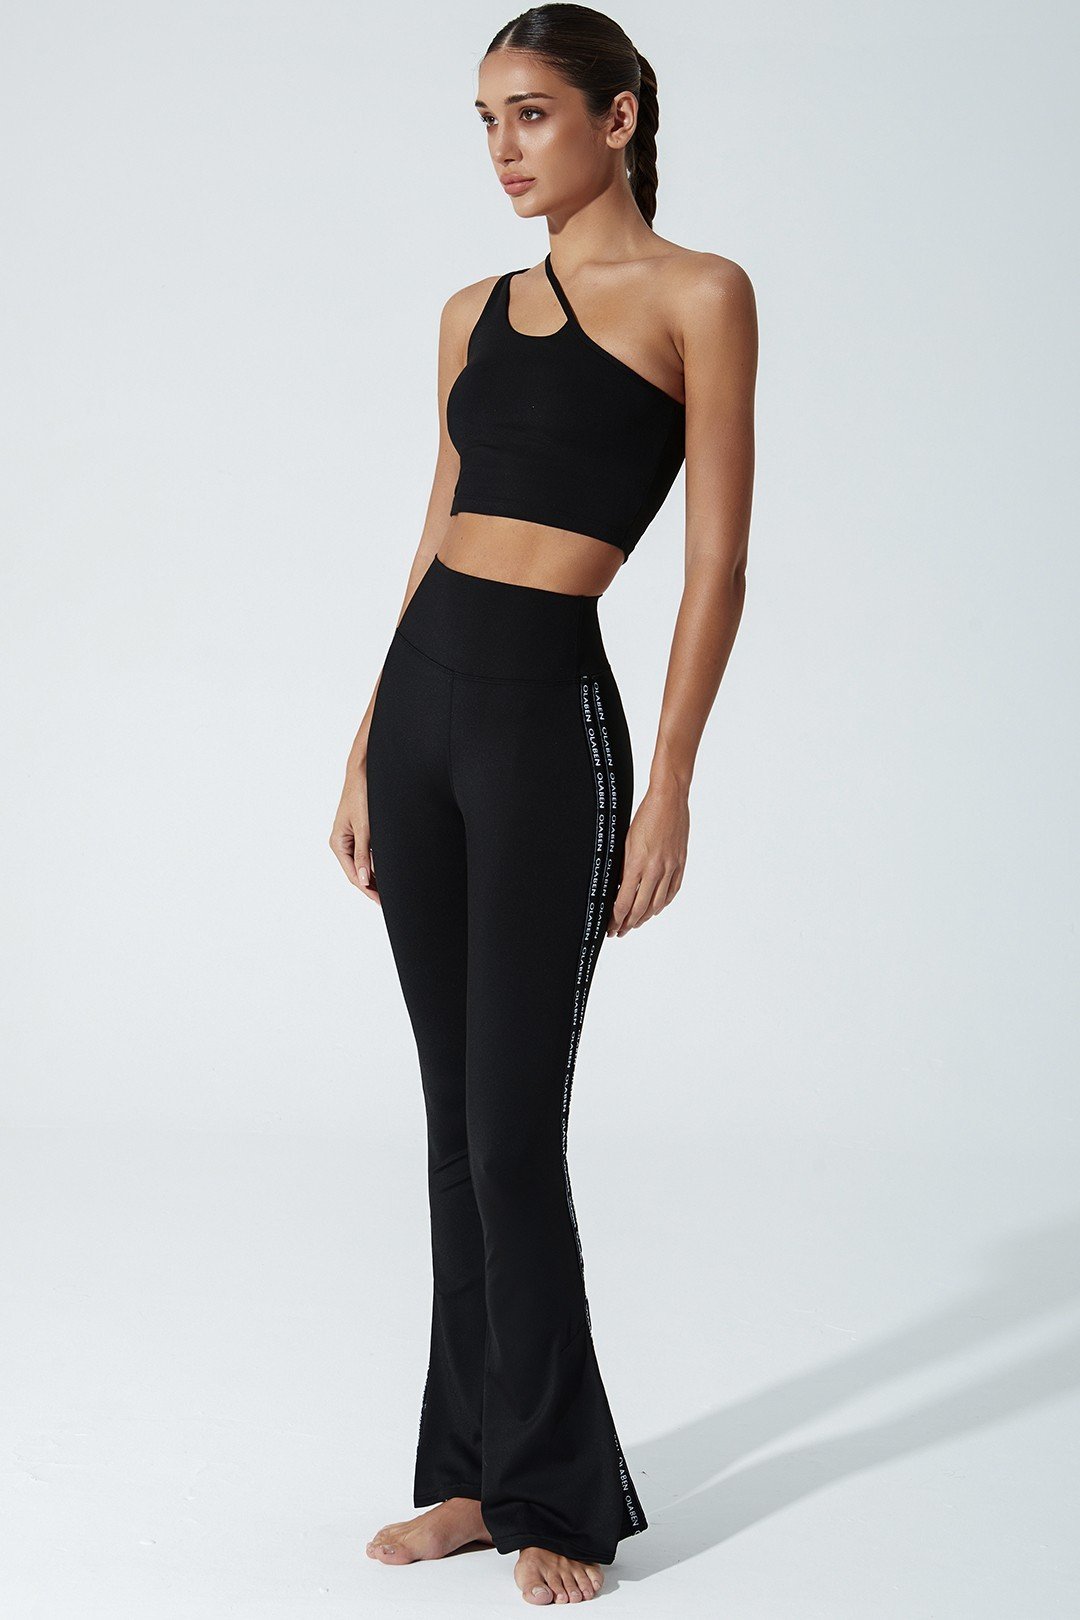 Black women's leggings with OLABEN YLANG logo, perfect for any stylish outfit.